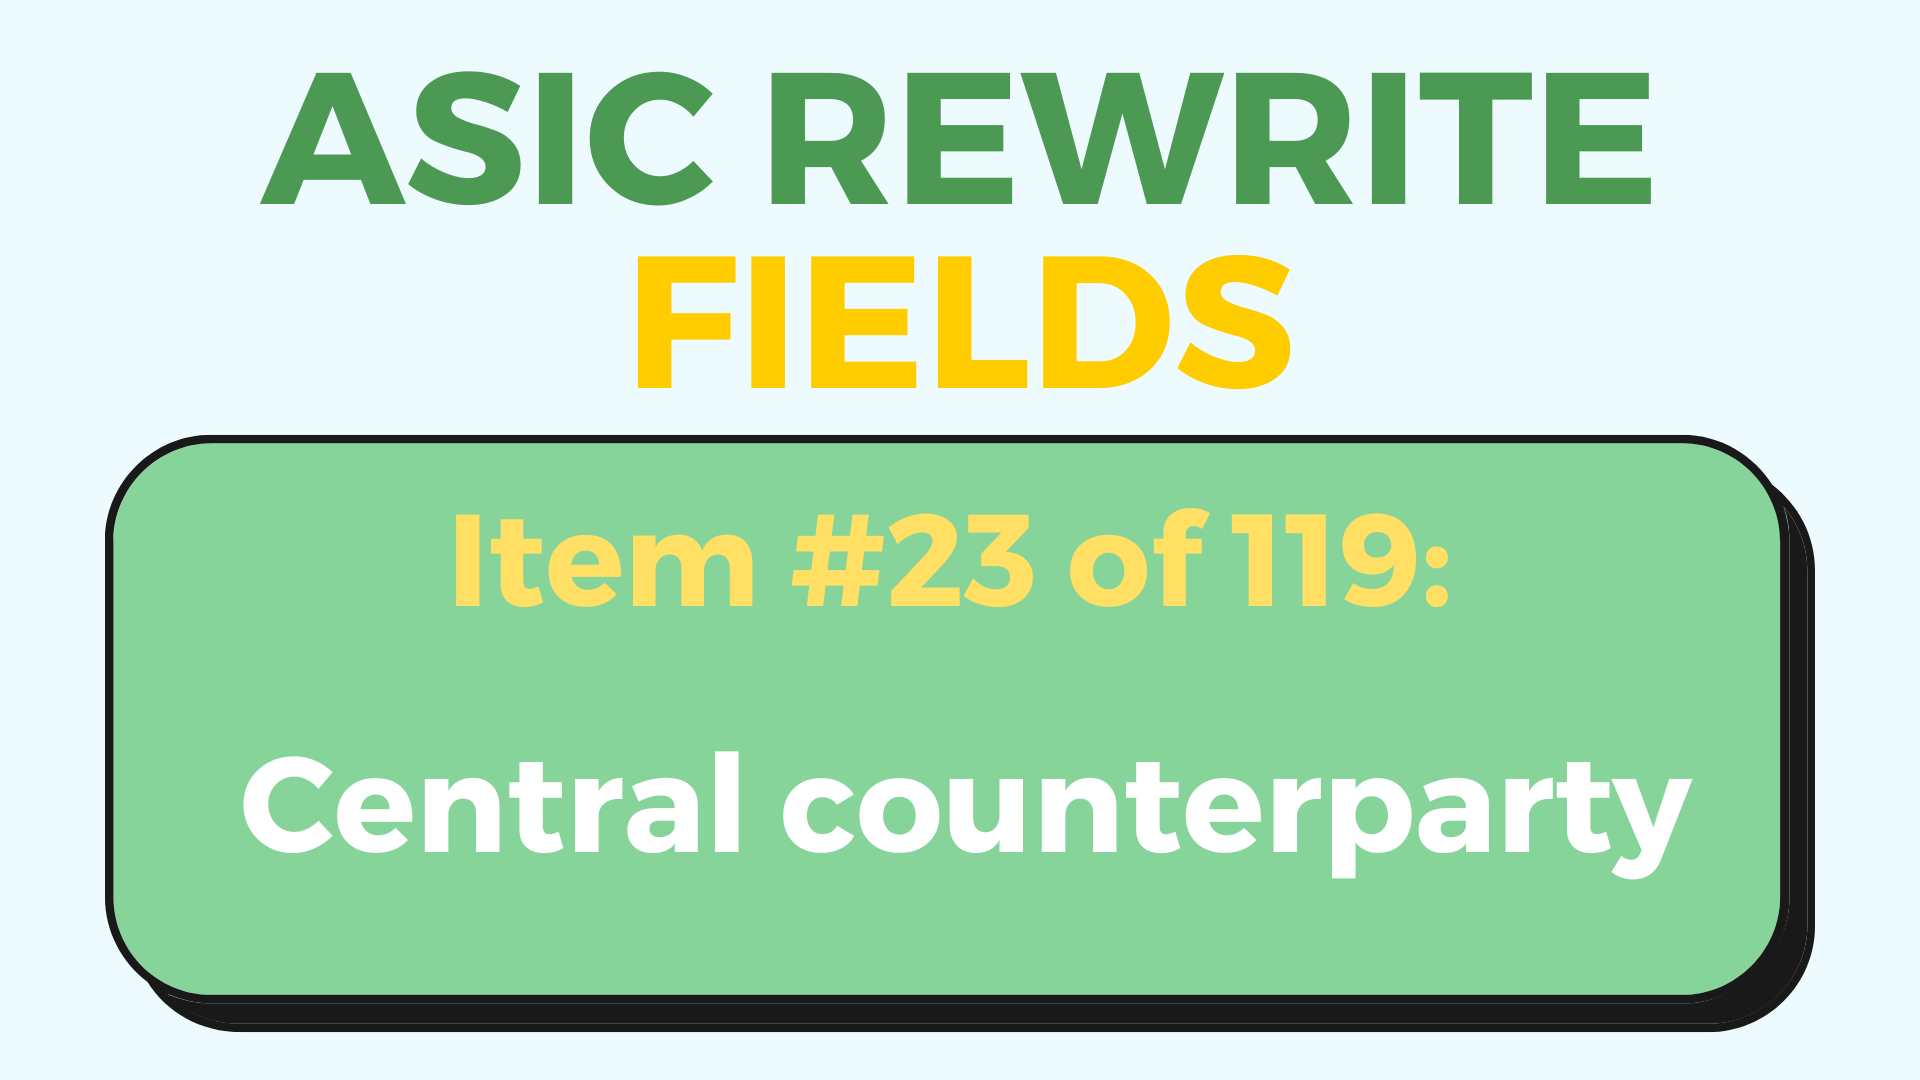 central counterparty - ASIC Rewrite